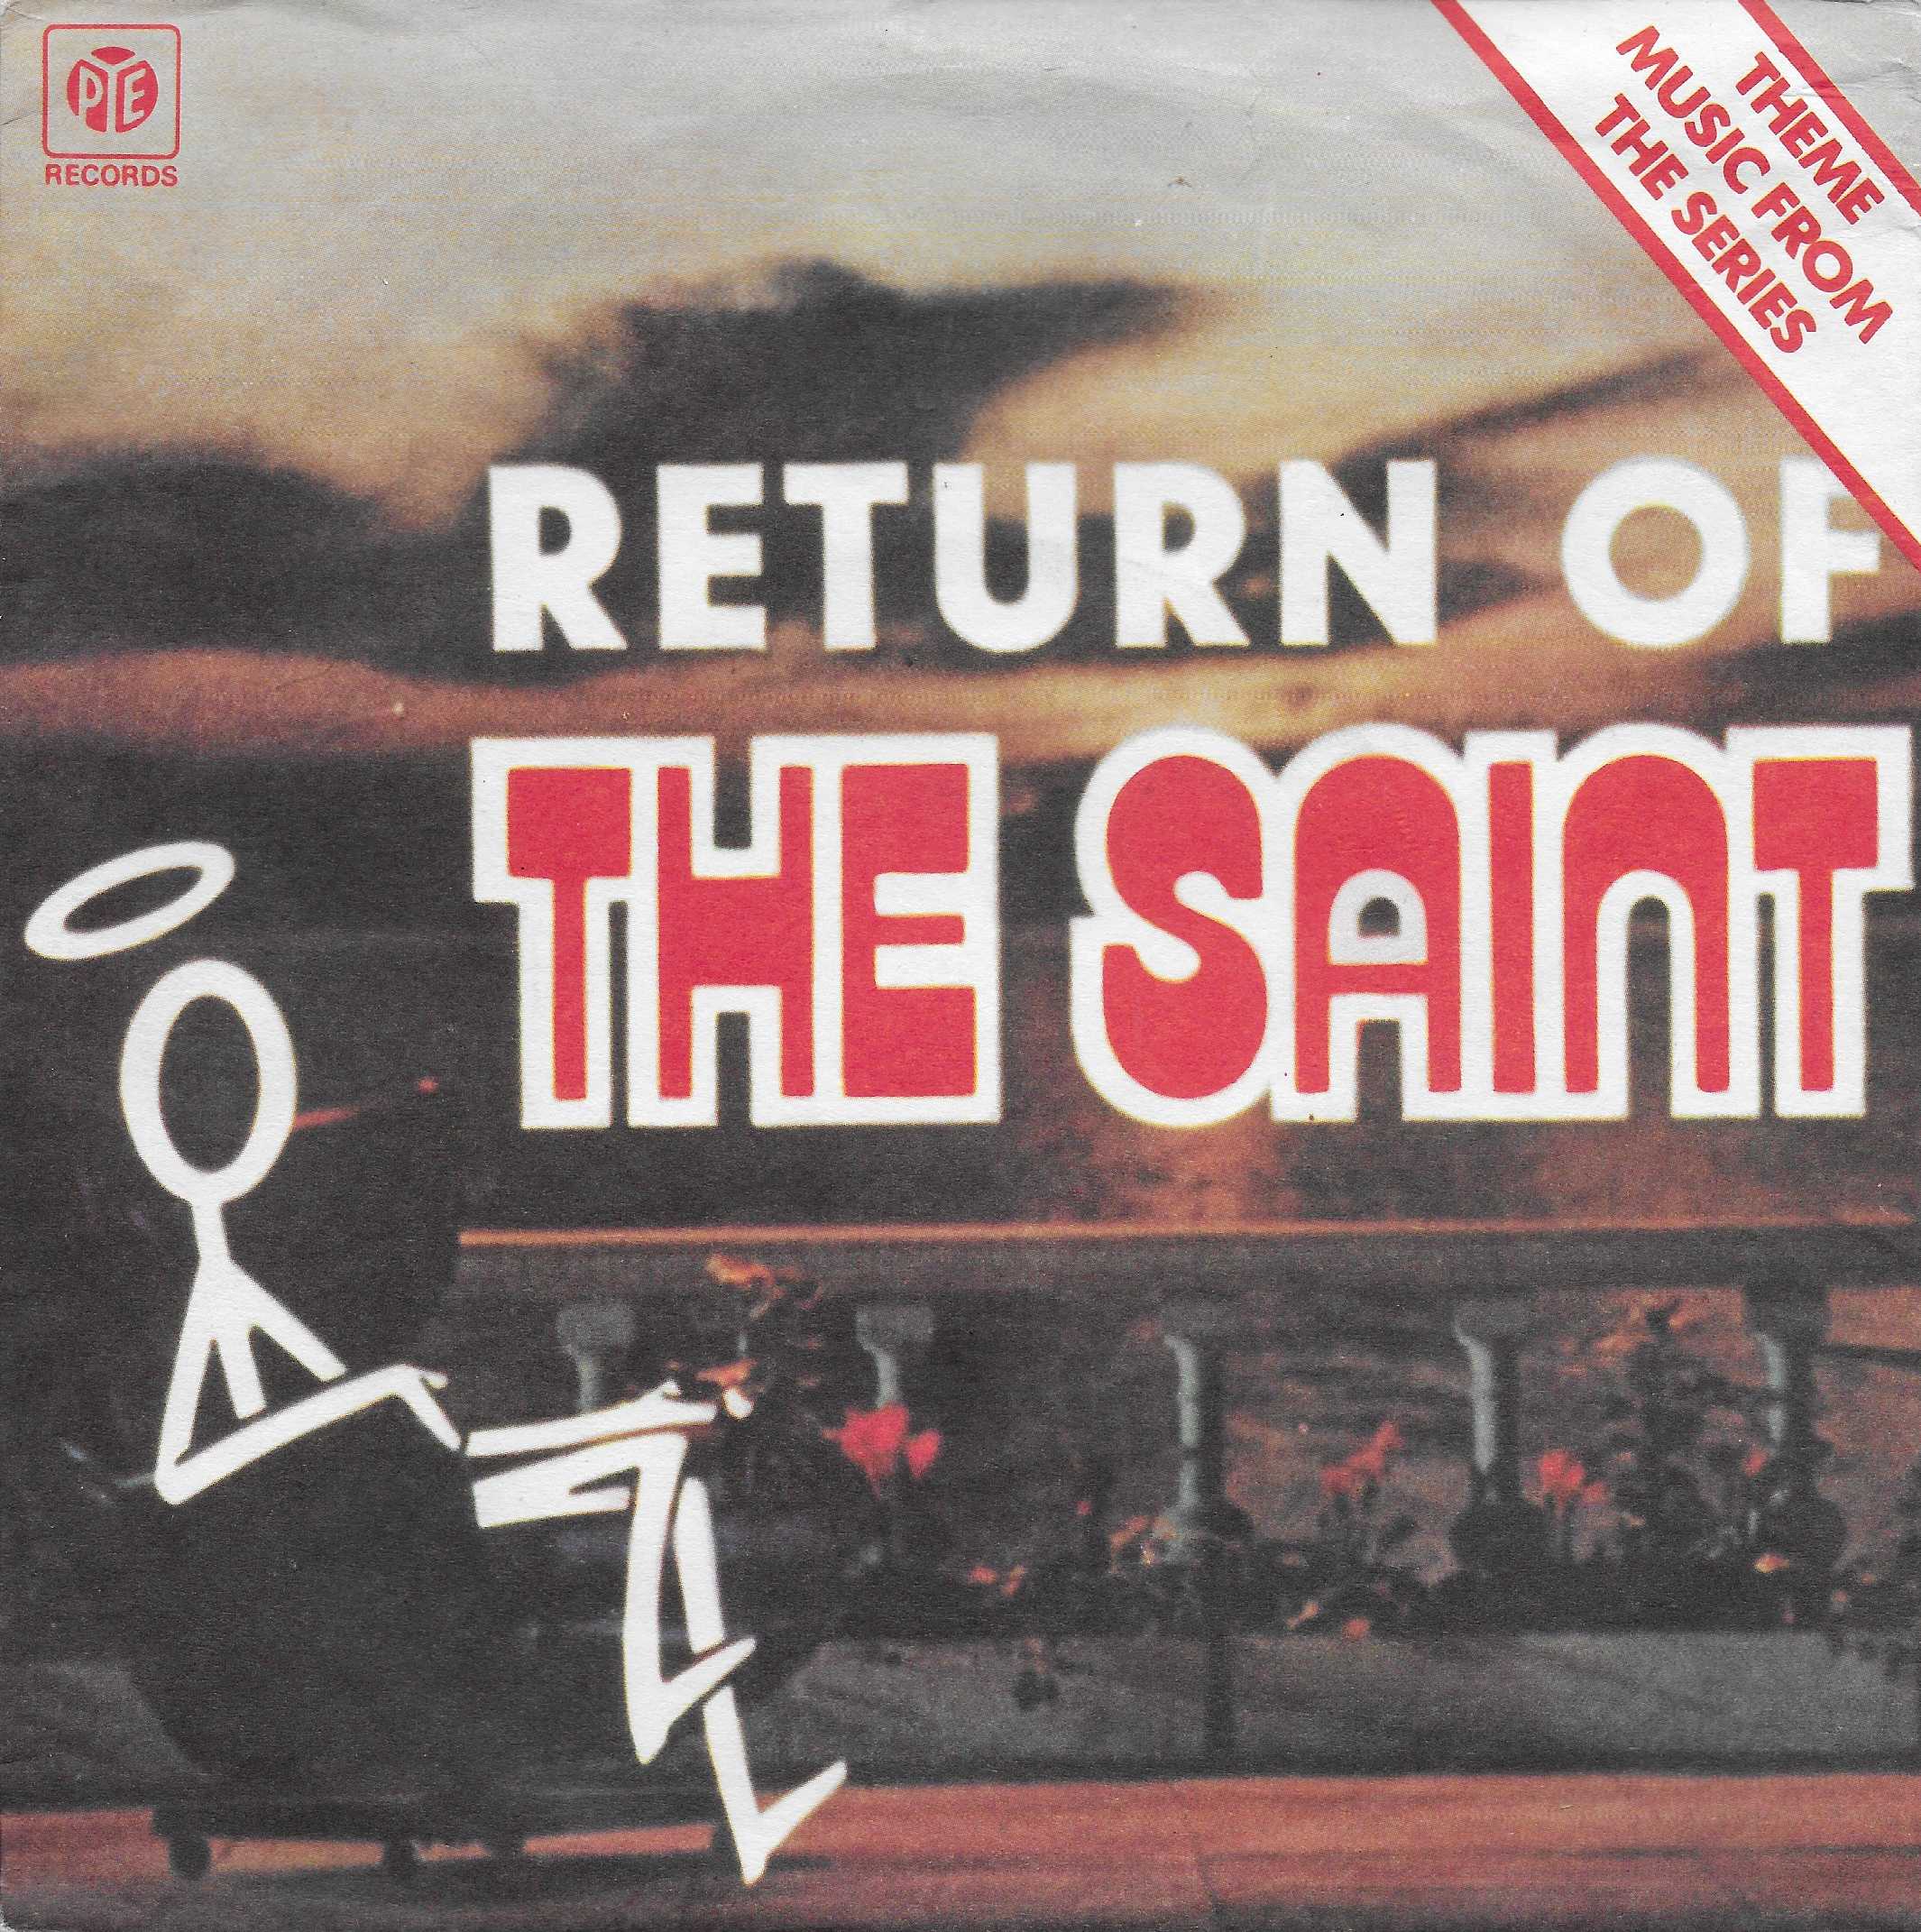 Picture of Return of the saint by artist Brian Dee / Irving Martin from ITV, Channel 4 and Channel 5 singles library